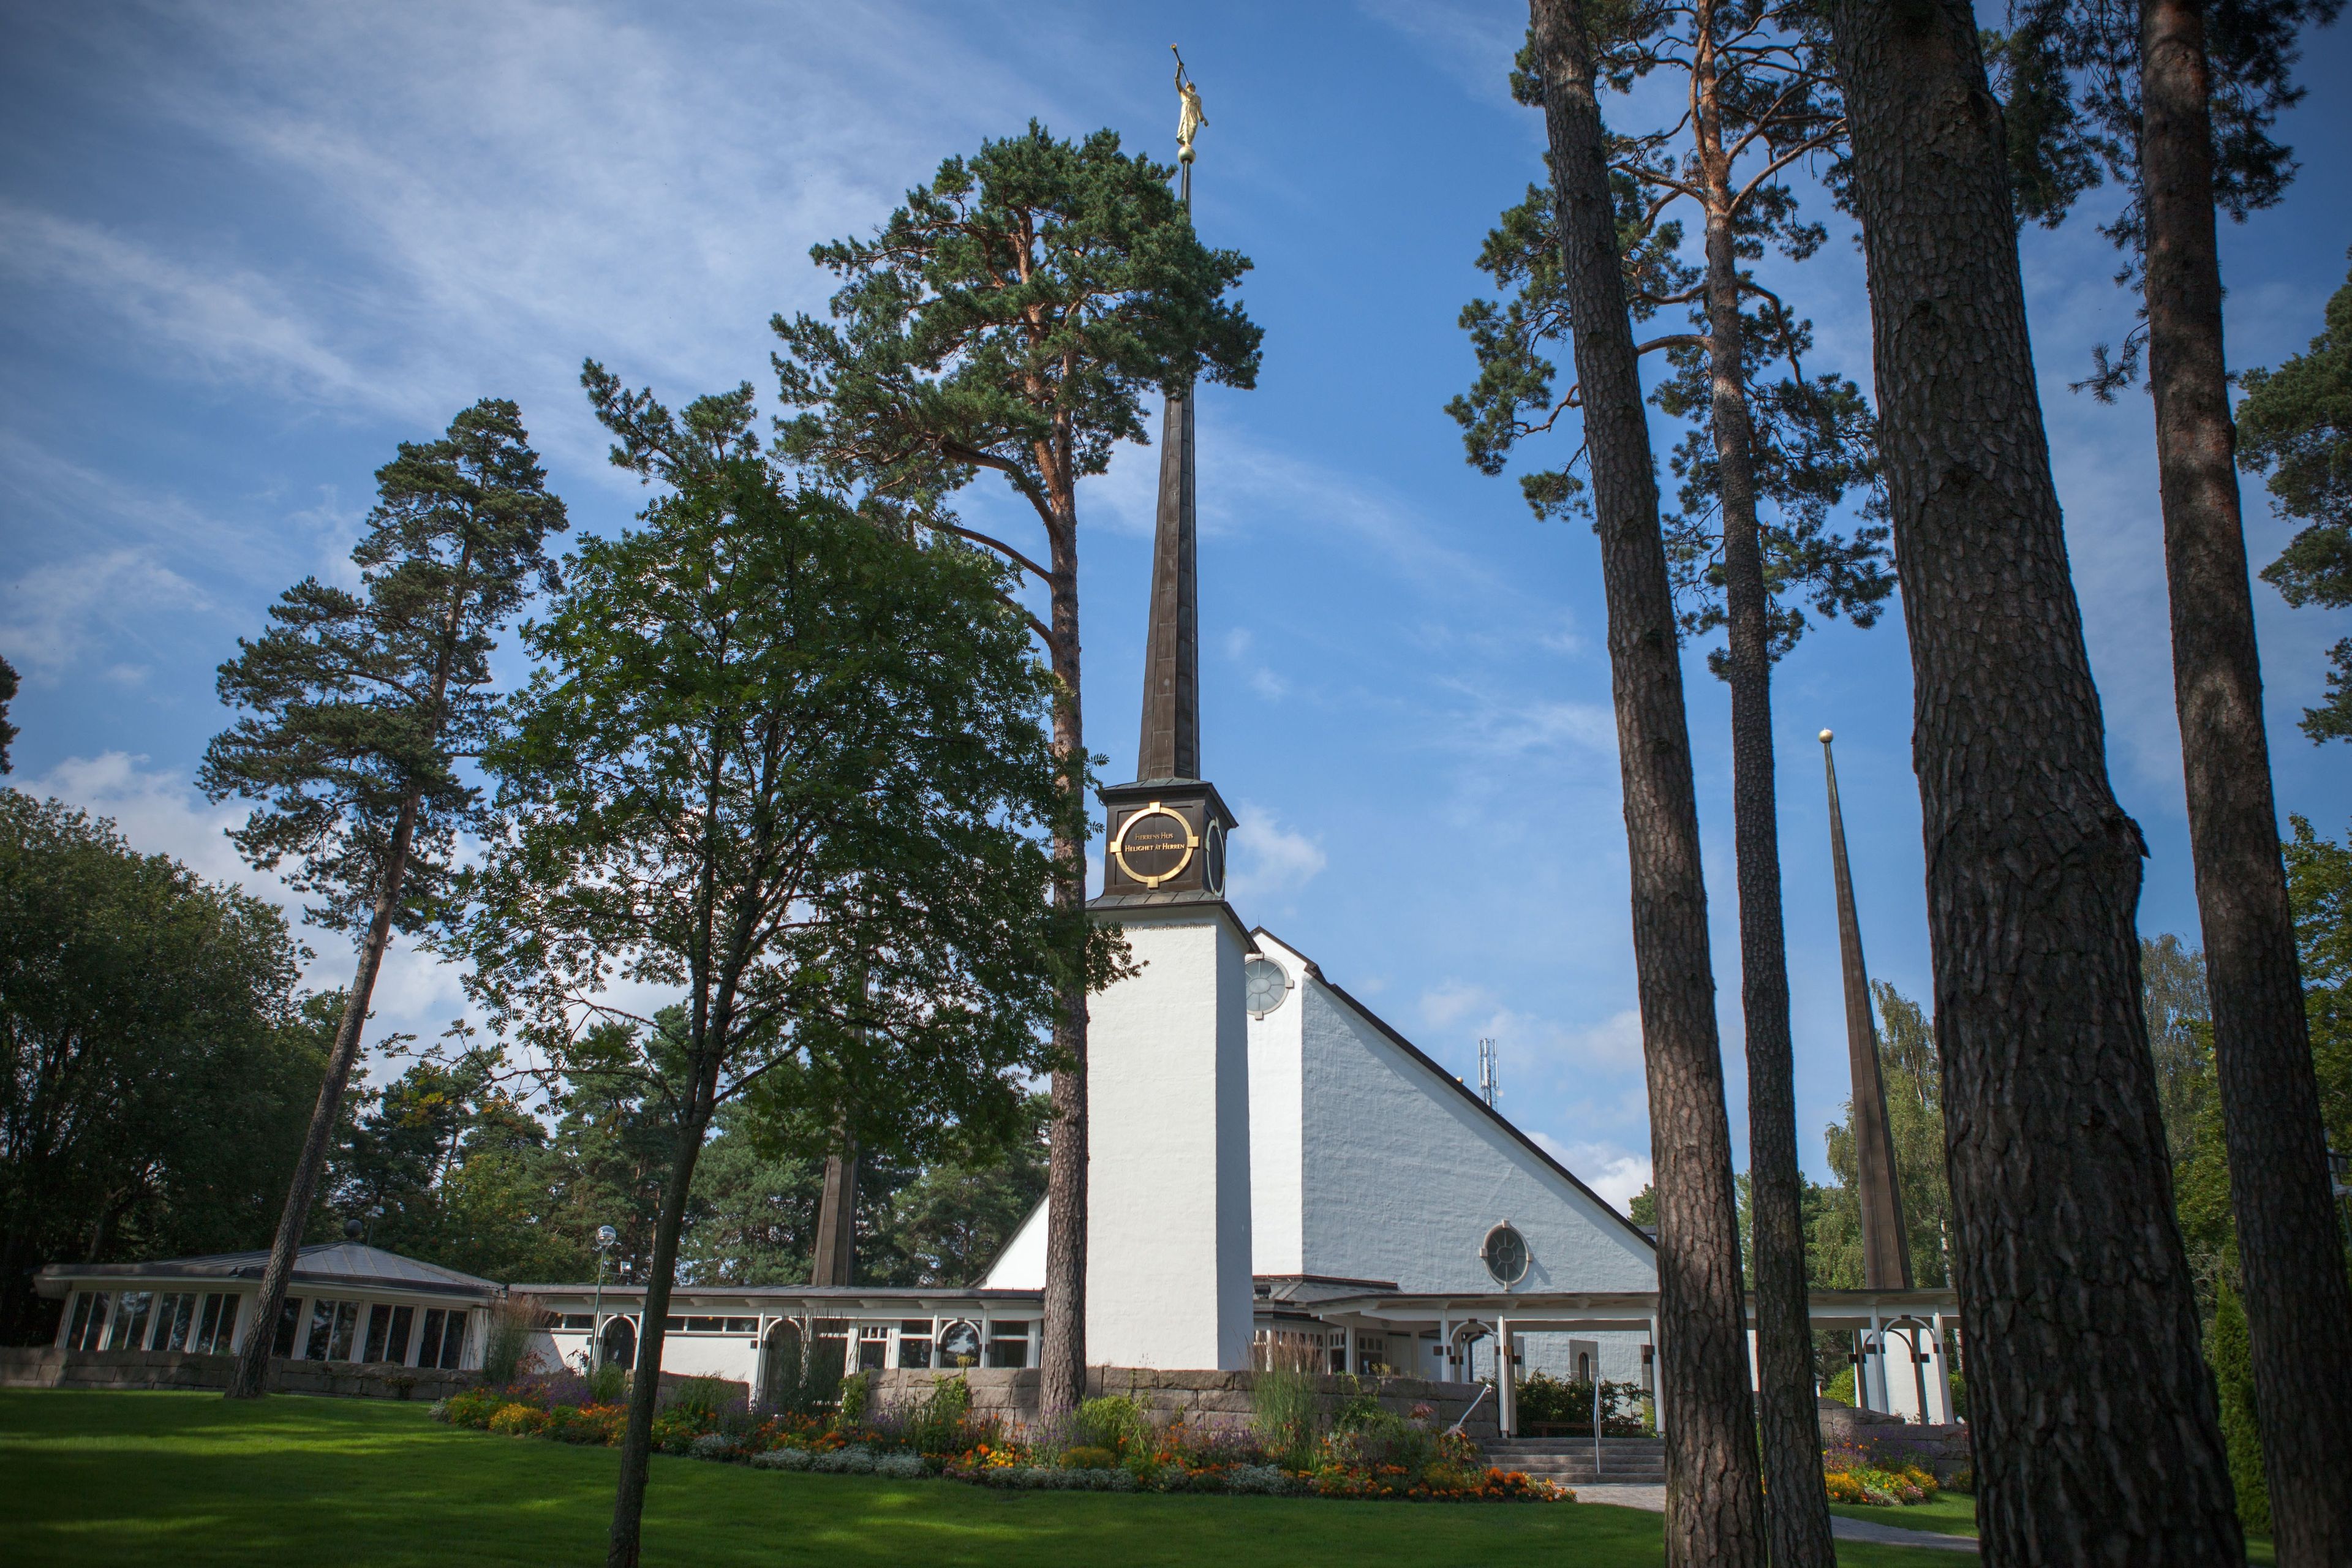 The Stockholm Sweden Temple, including the entrance and scenery.